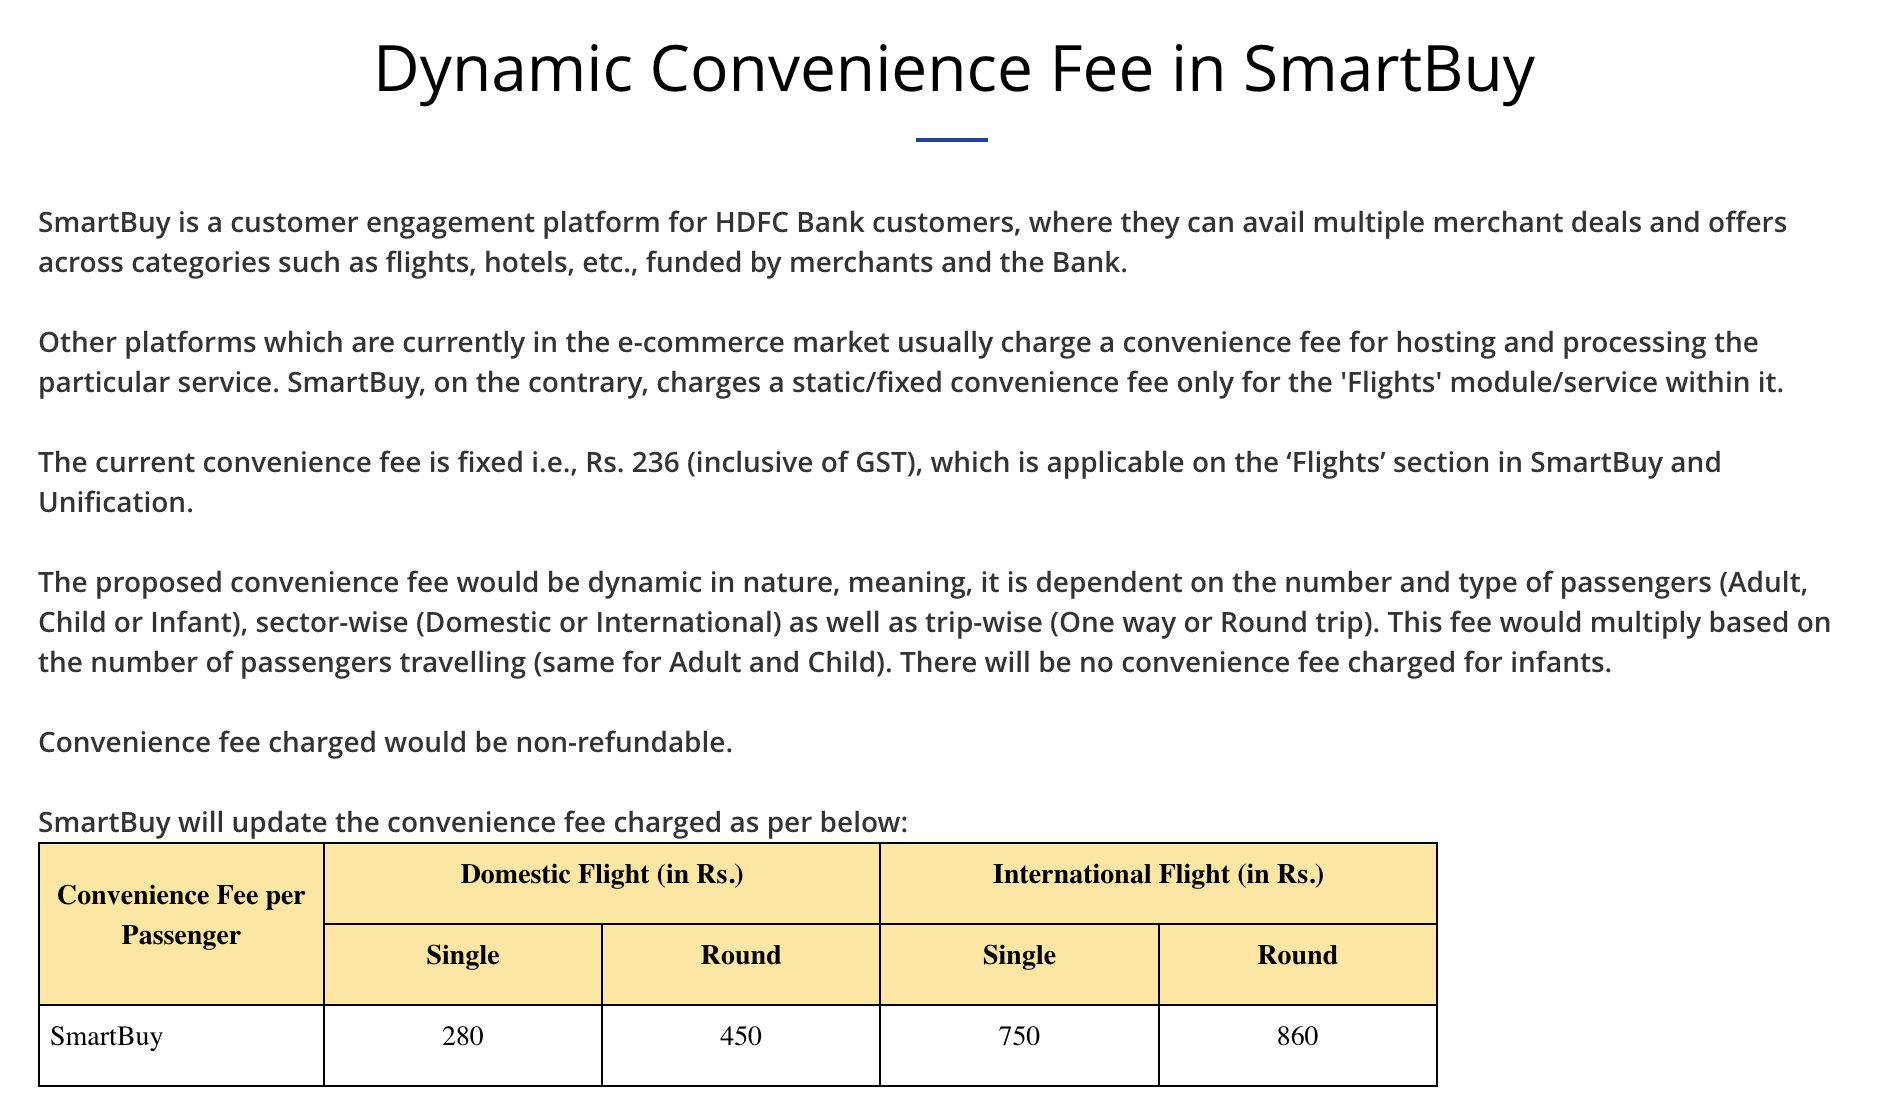 HDFC Smartbuy Dynamic Convenience Fee on Flight booking